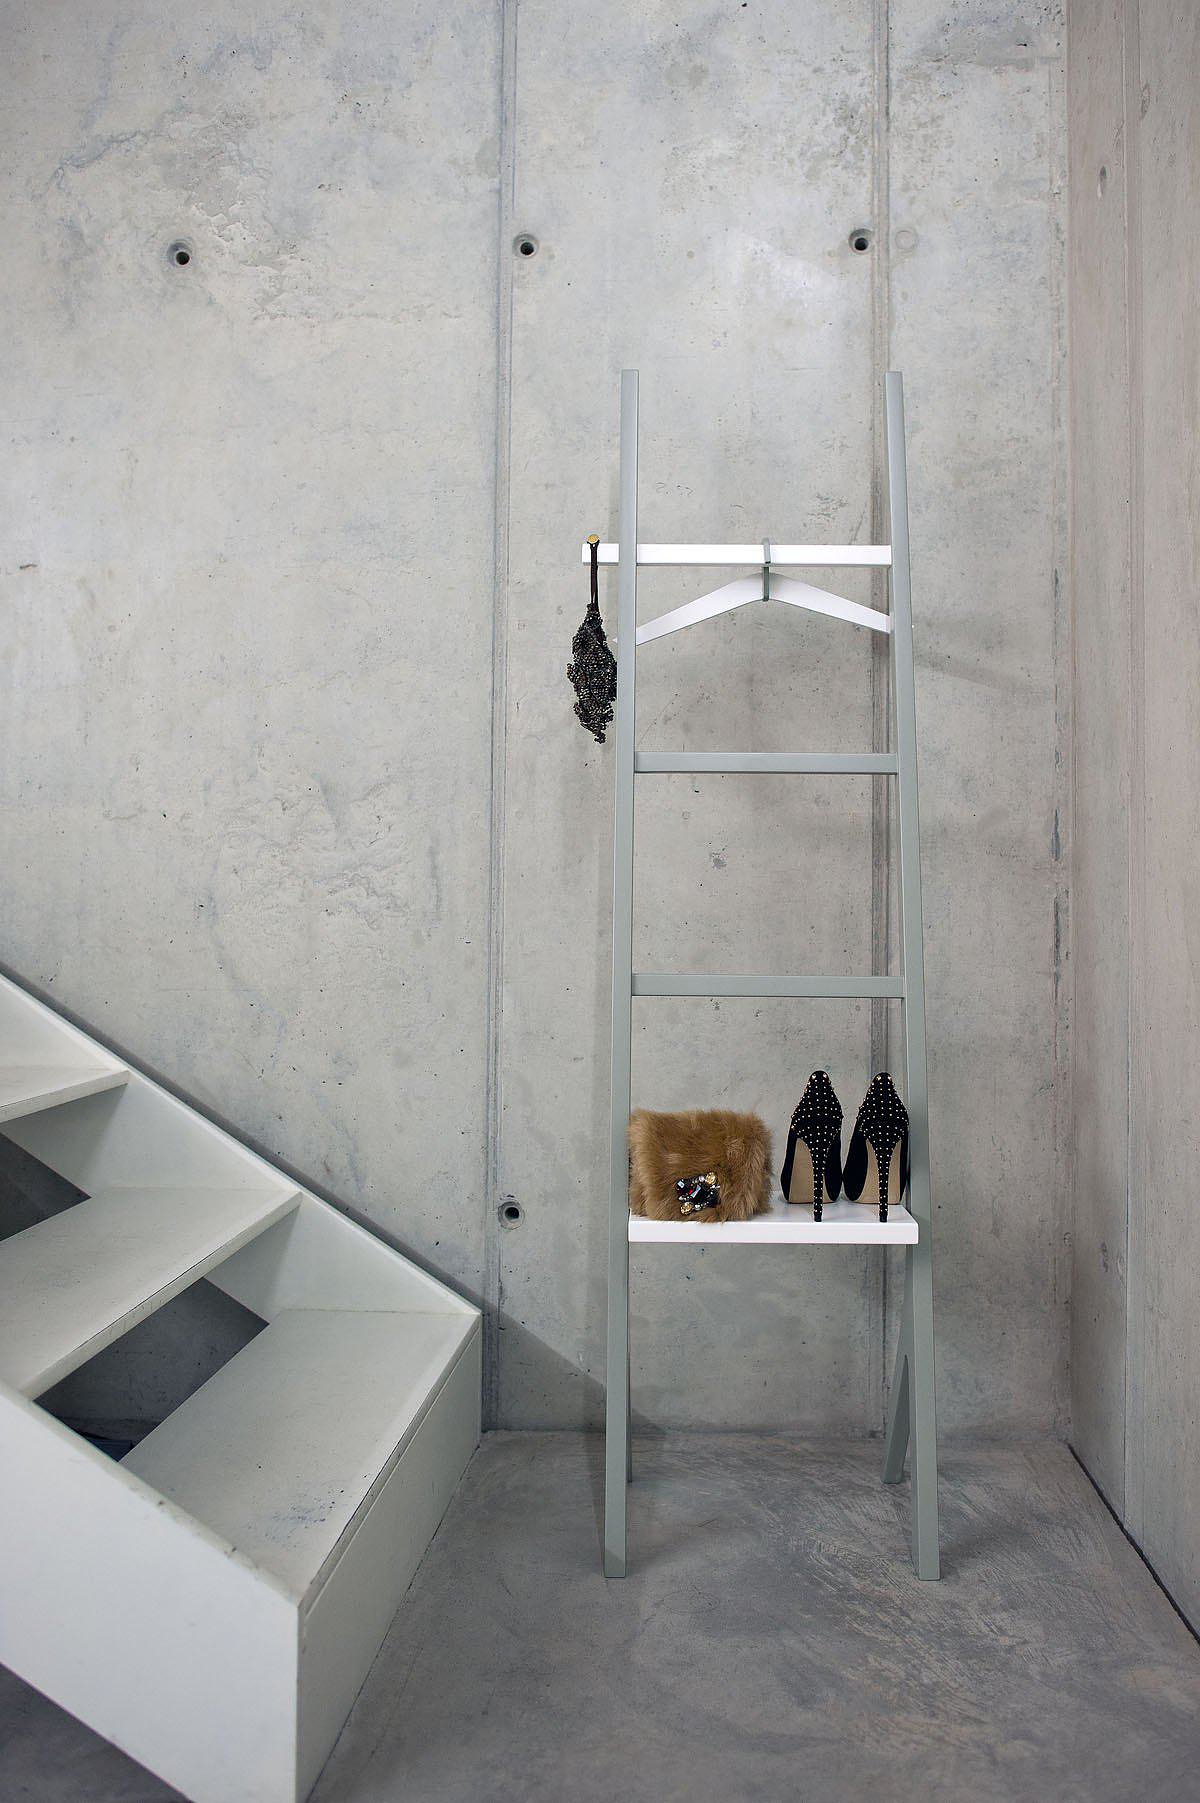 YPSY Shelving Unit by Two.Six, reinterpreting the role of a ladder.